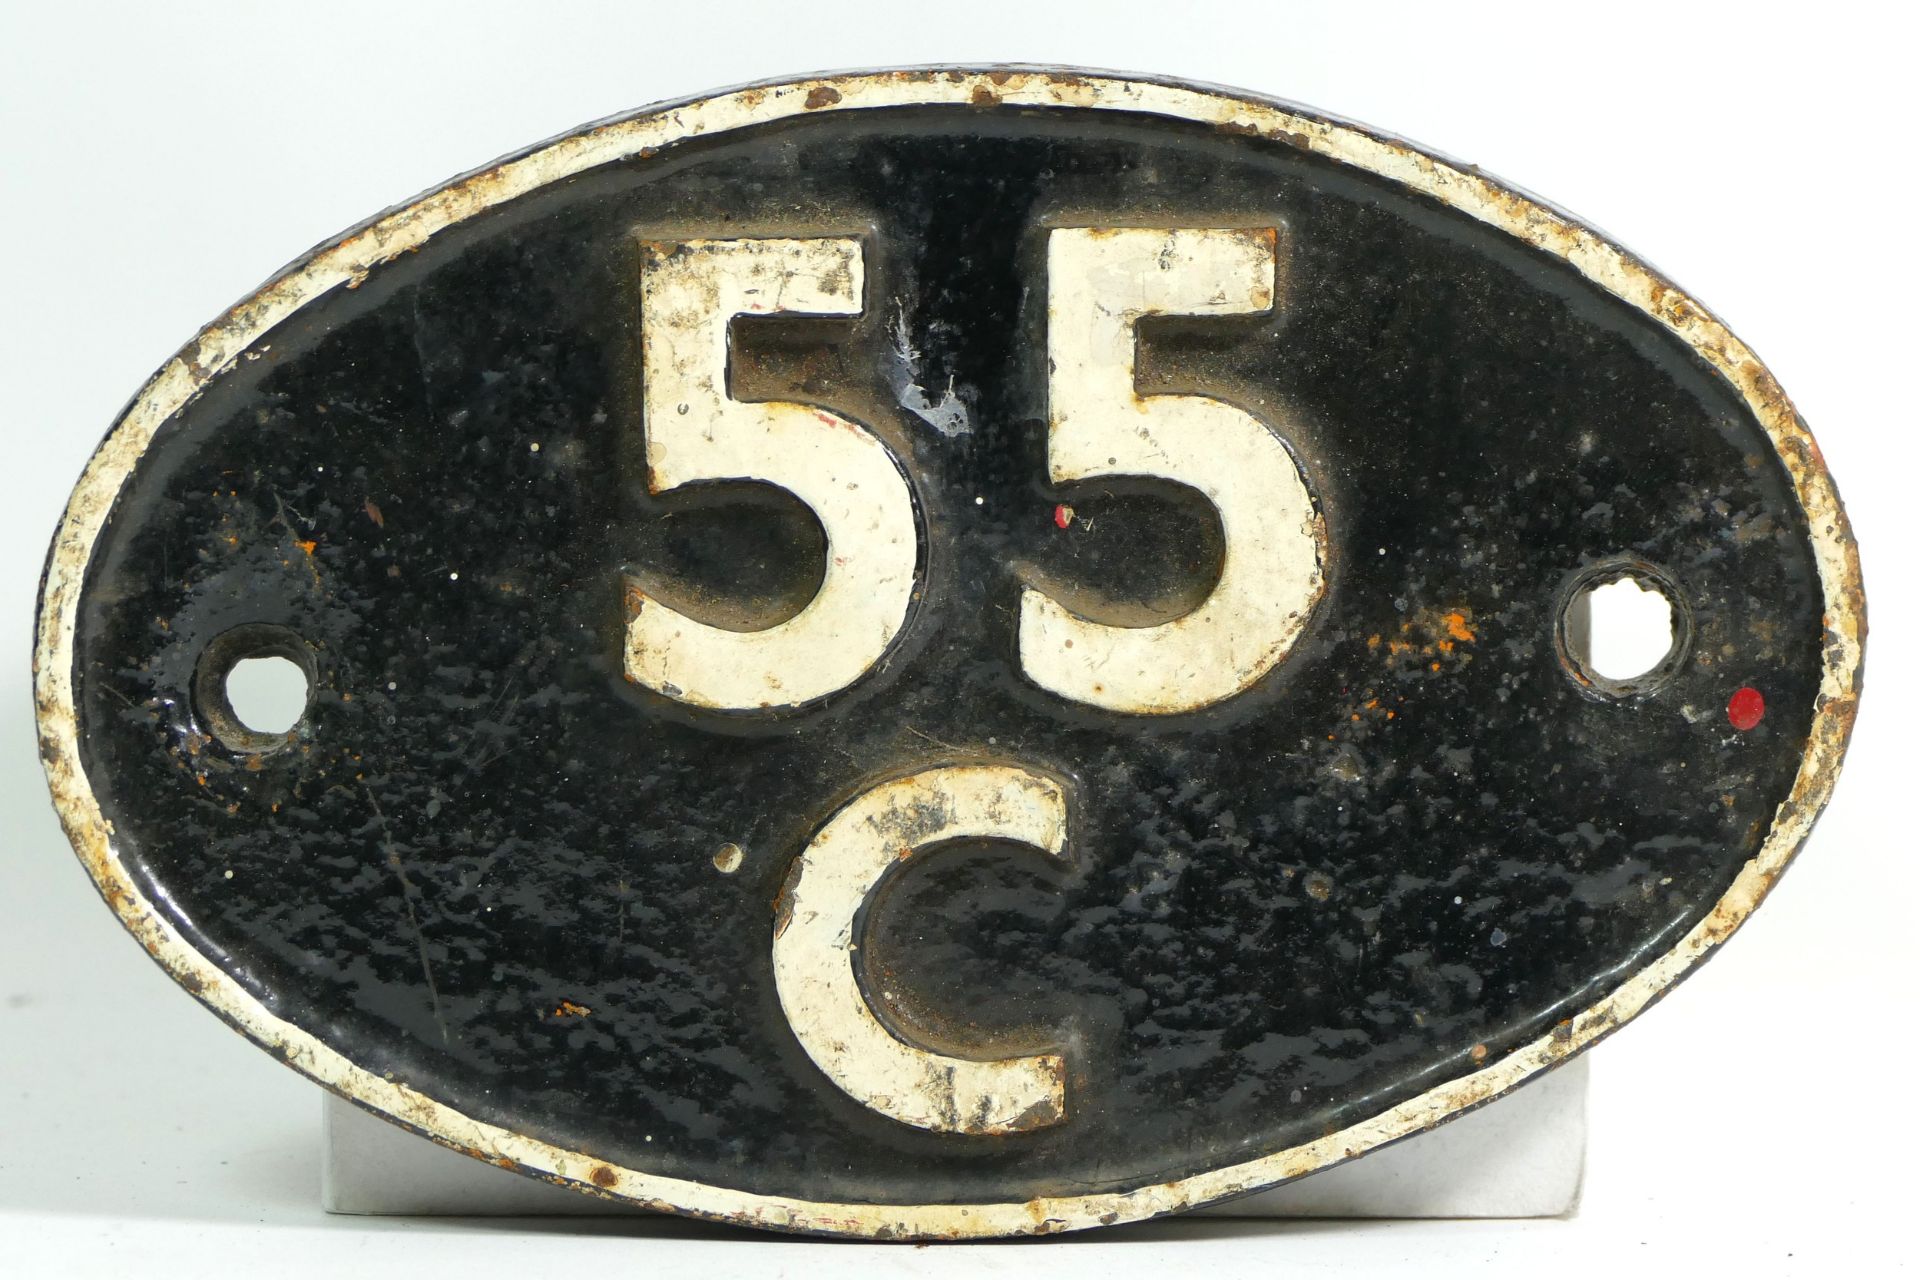 An oval cast iron shed plate, '55C Farnley Junction (Leeds)'.